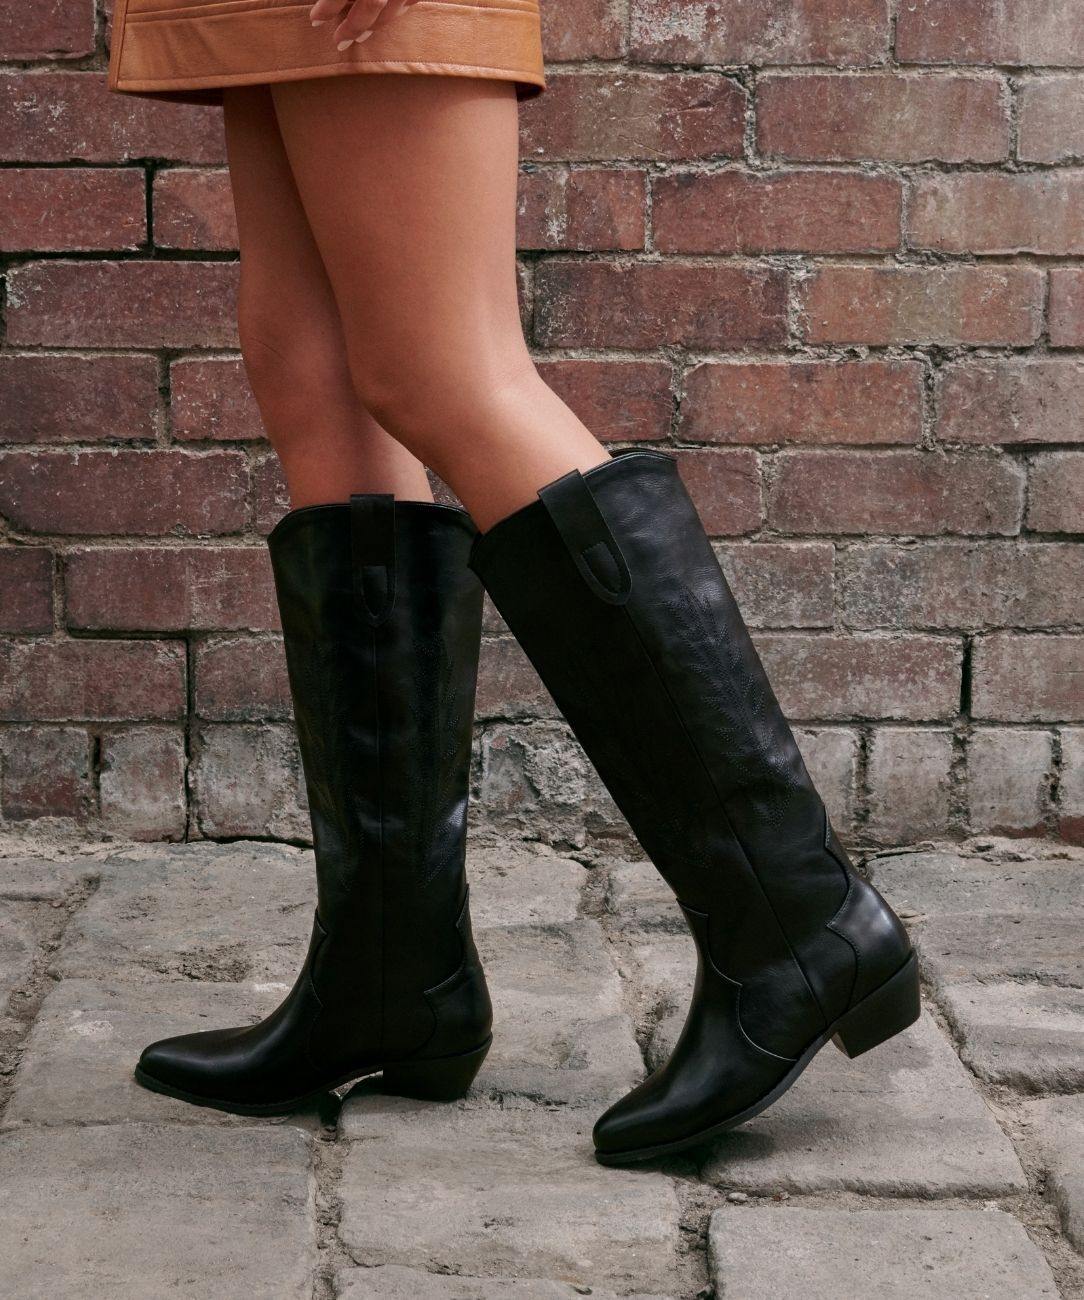 Therapy Shoes Bonnie Black | Women's Boots | Western | Knee High | Tall